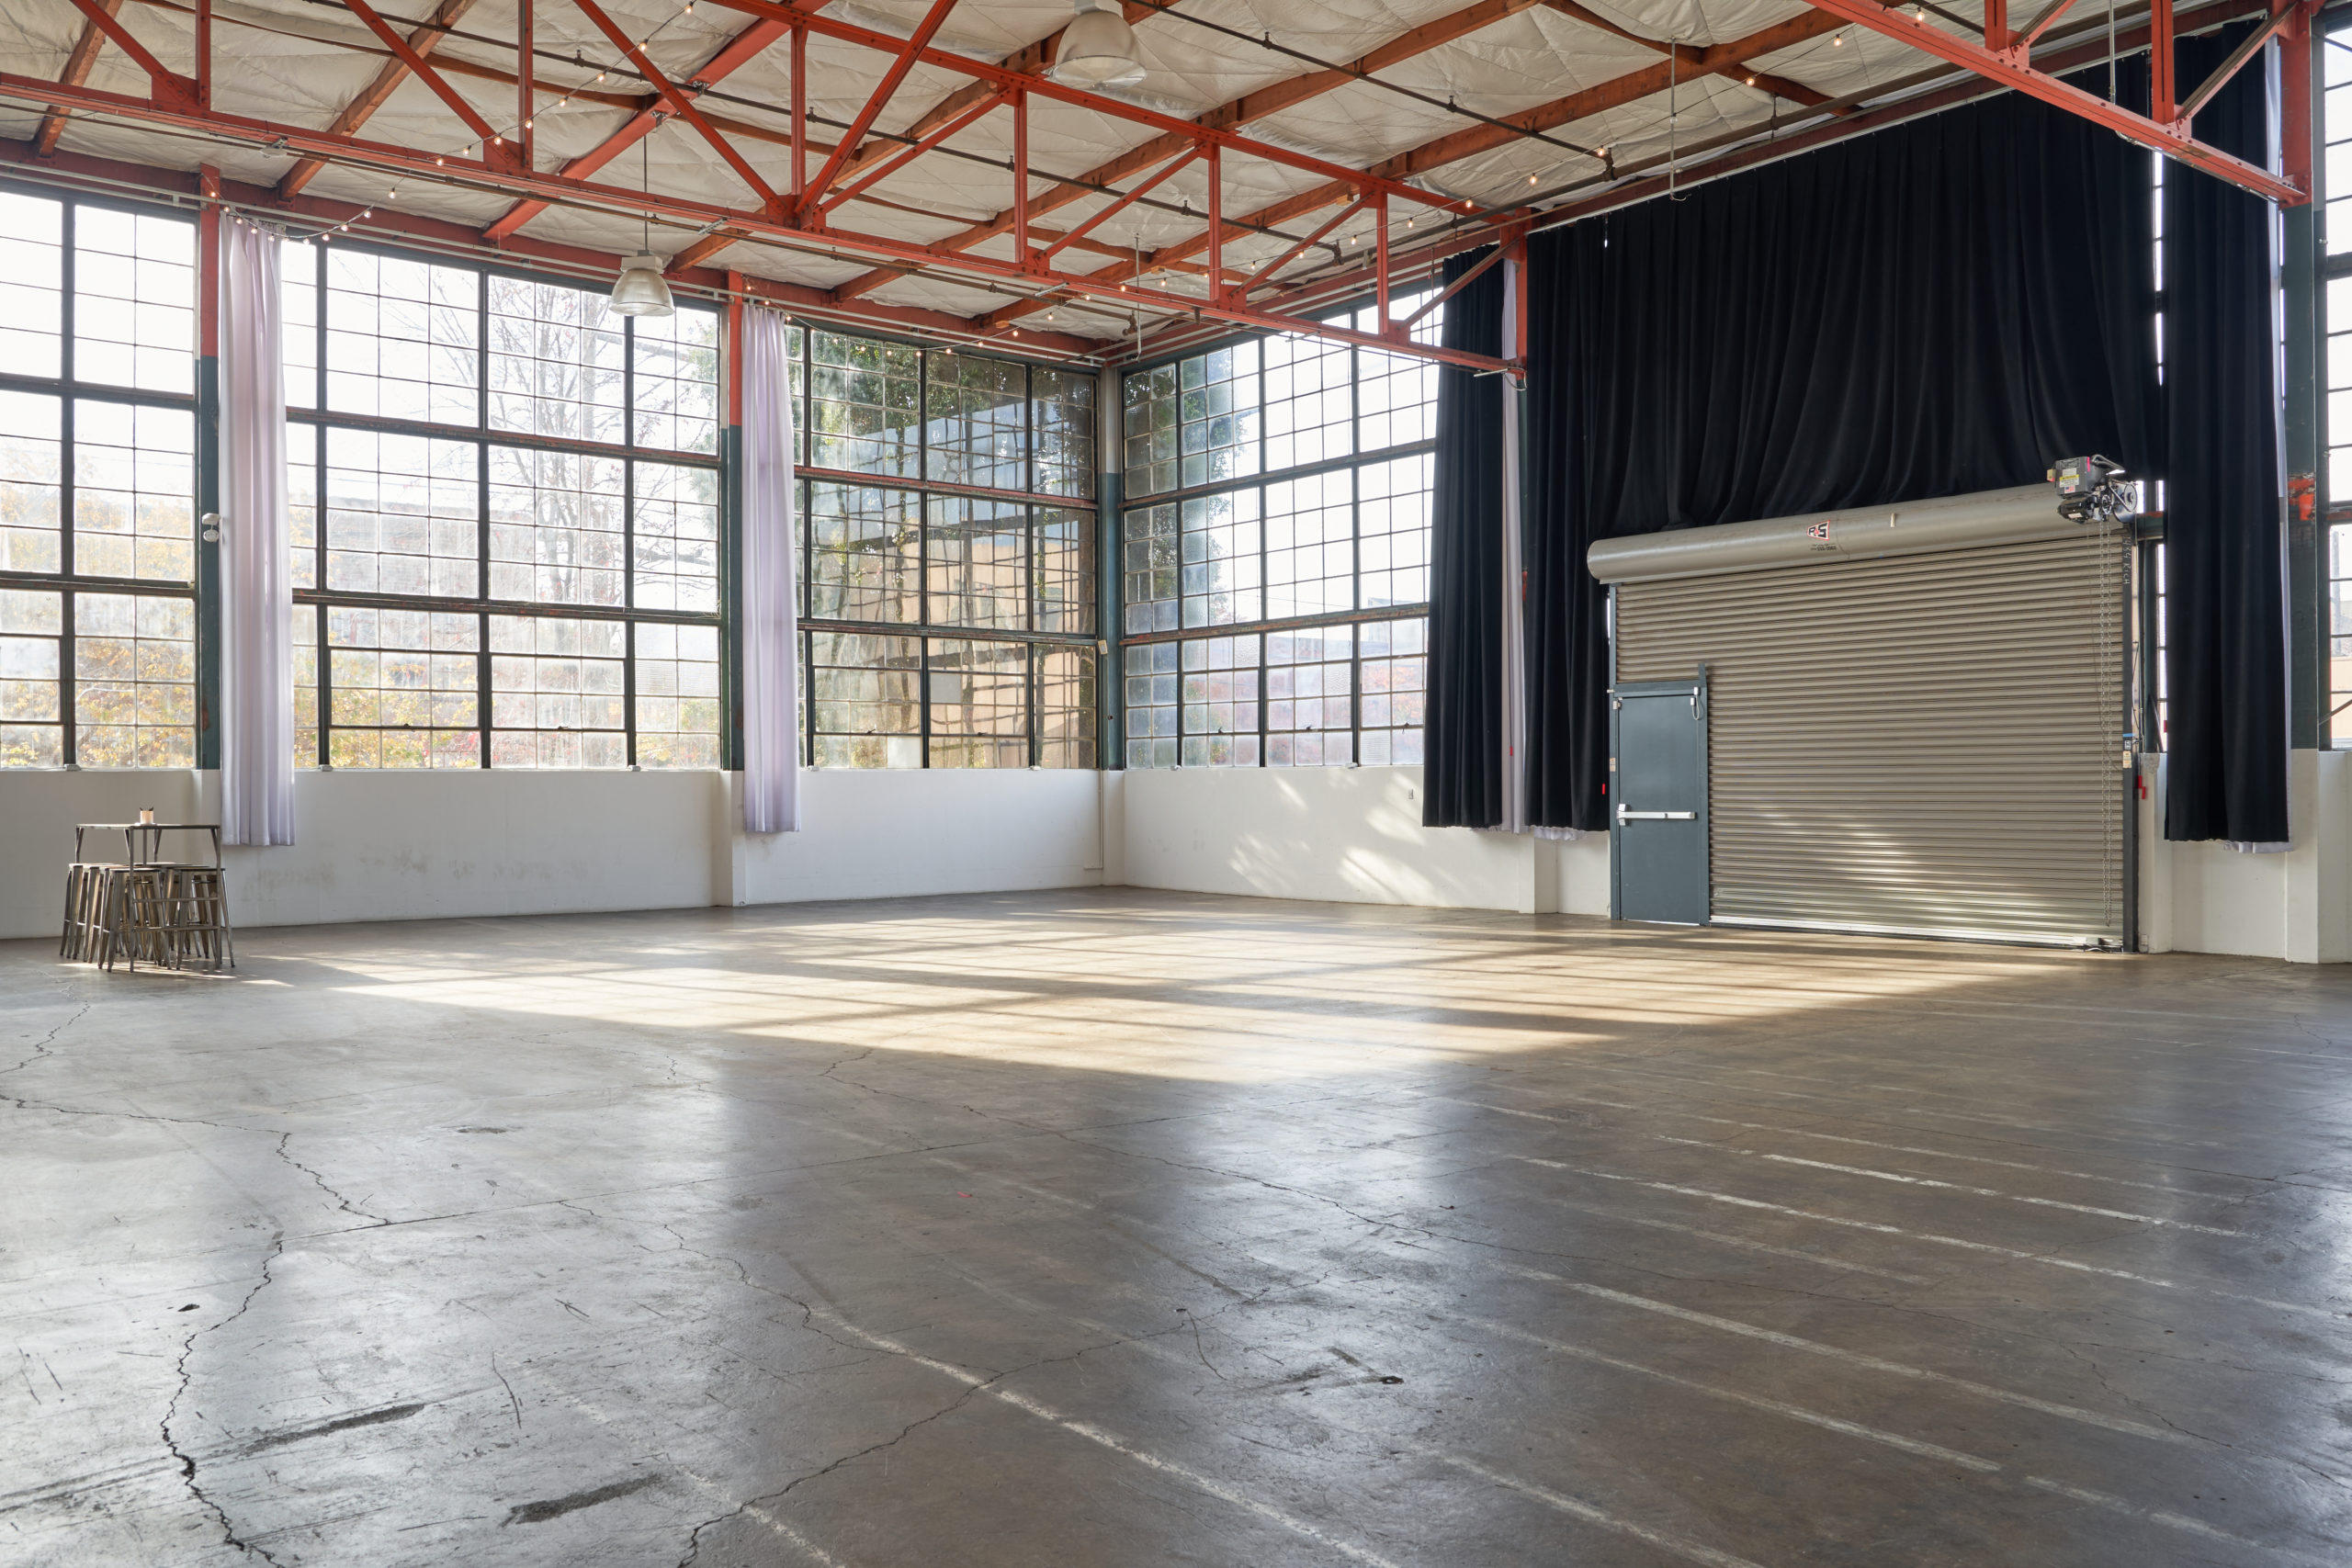 Expansive view of Studio 5 with 3,700 square feet of space. You see a closed door over the private loading dock, a large wall of windows, a small table with chairs, and orange industrial beams on the ceiling of the best multiple set studio rental Berkeley has.